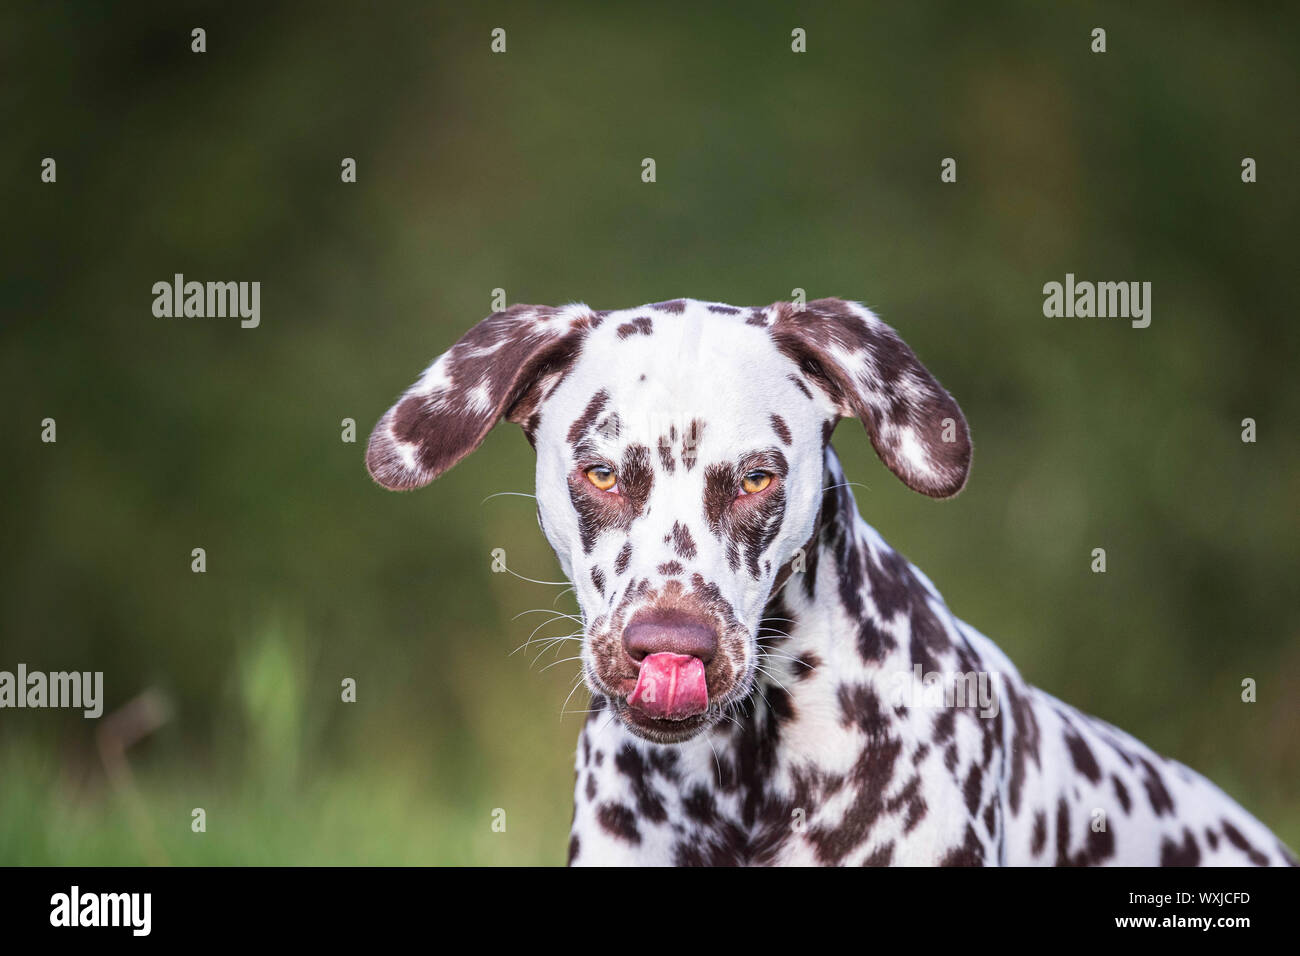 Dalmatian. Portrait of adult, licking its nose. Germany Stock Photo